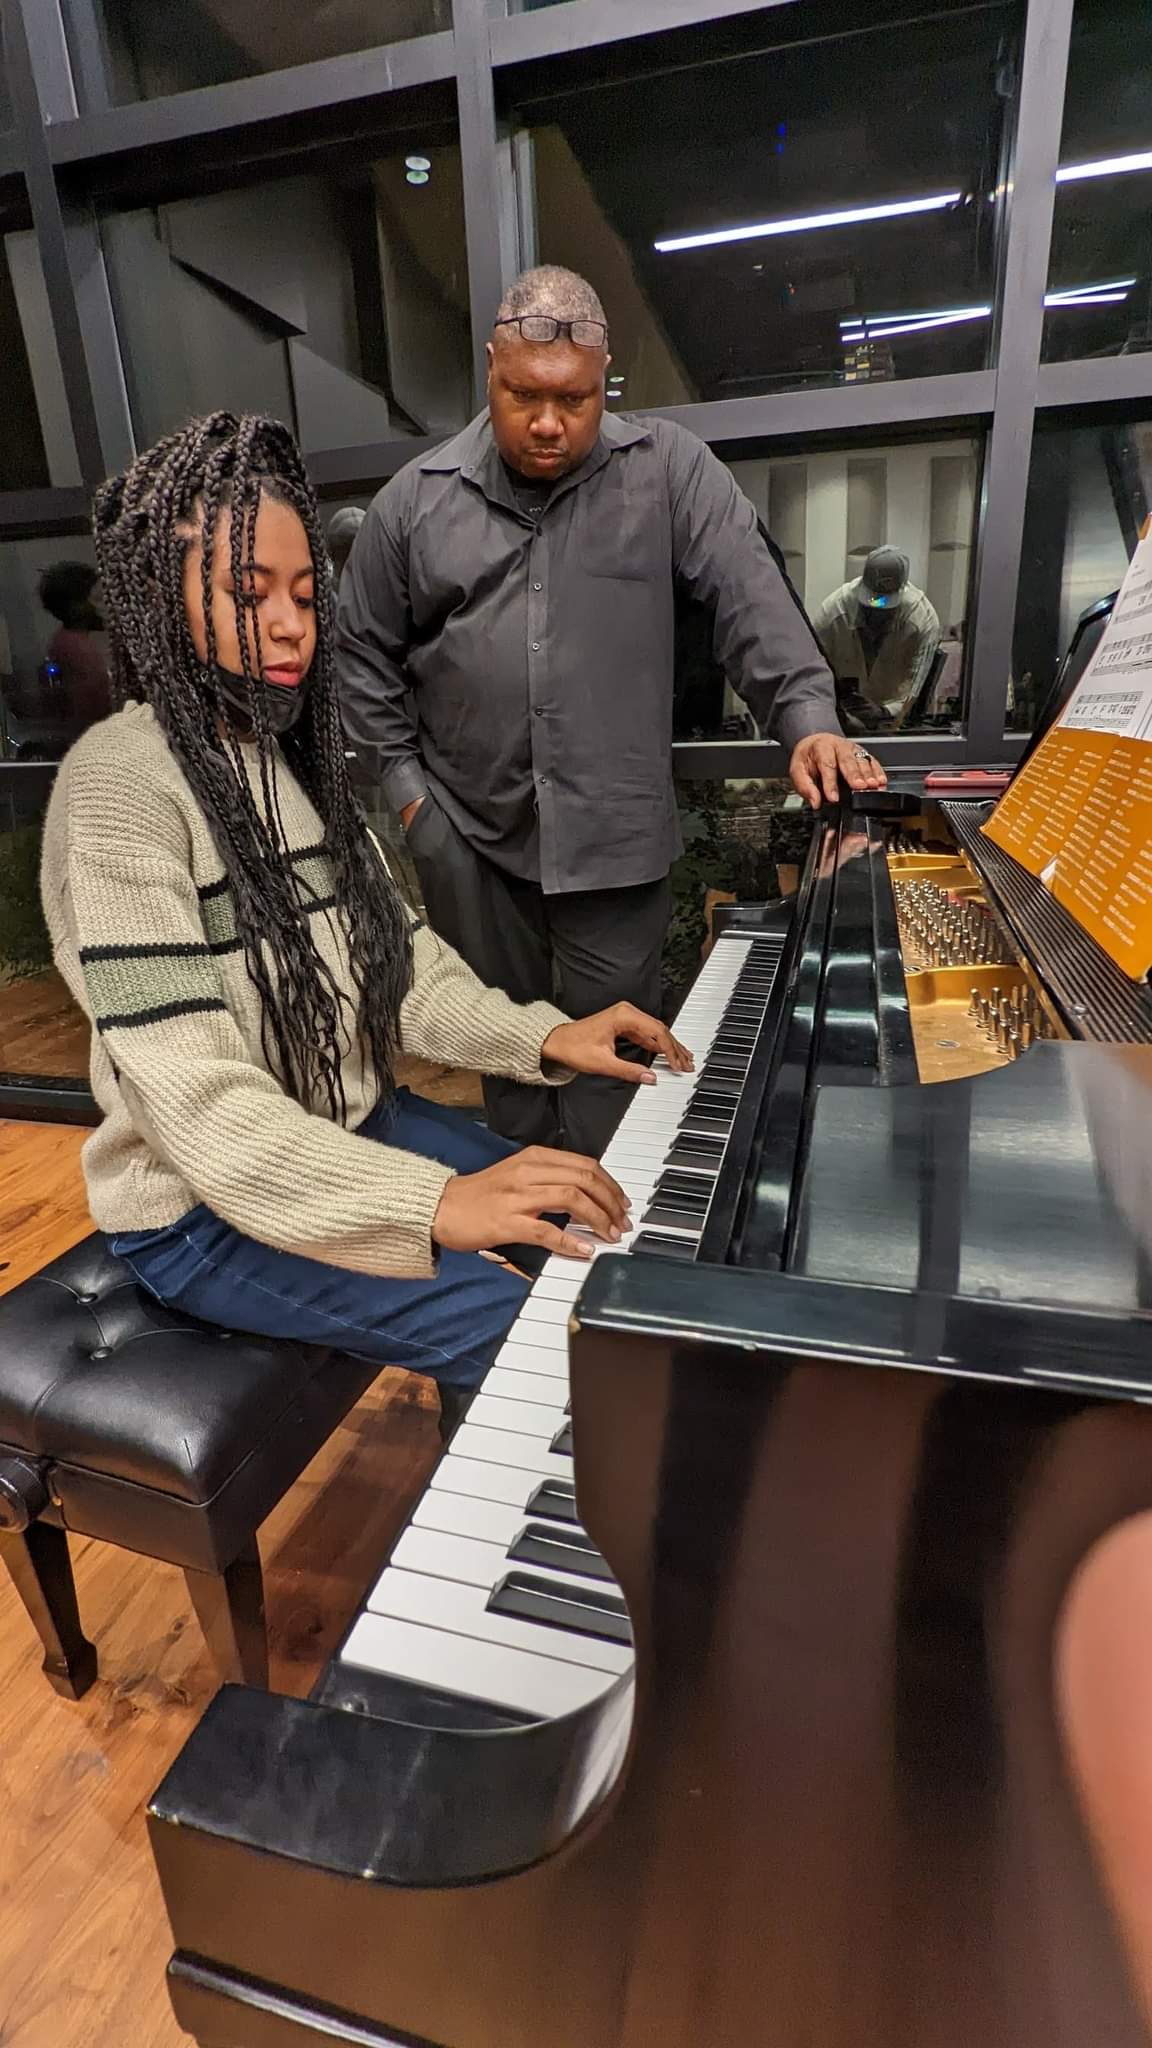 Laurin Mccoy with Wycliff Gordon. She is a young african american teenager with long, black braids. She is seated infront of a piano, that she is playing. She is wearing a beige sweater and blue jeans. Wycliff is standing beside her, teaching her to play. He is an middle aged african american man. He has a shaved head. He is wearing a black button down shirt.